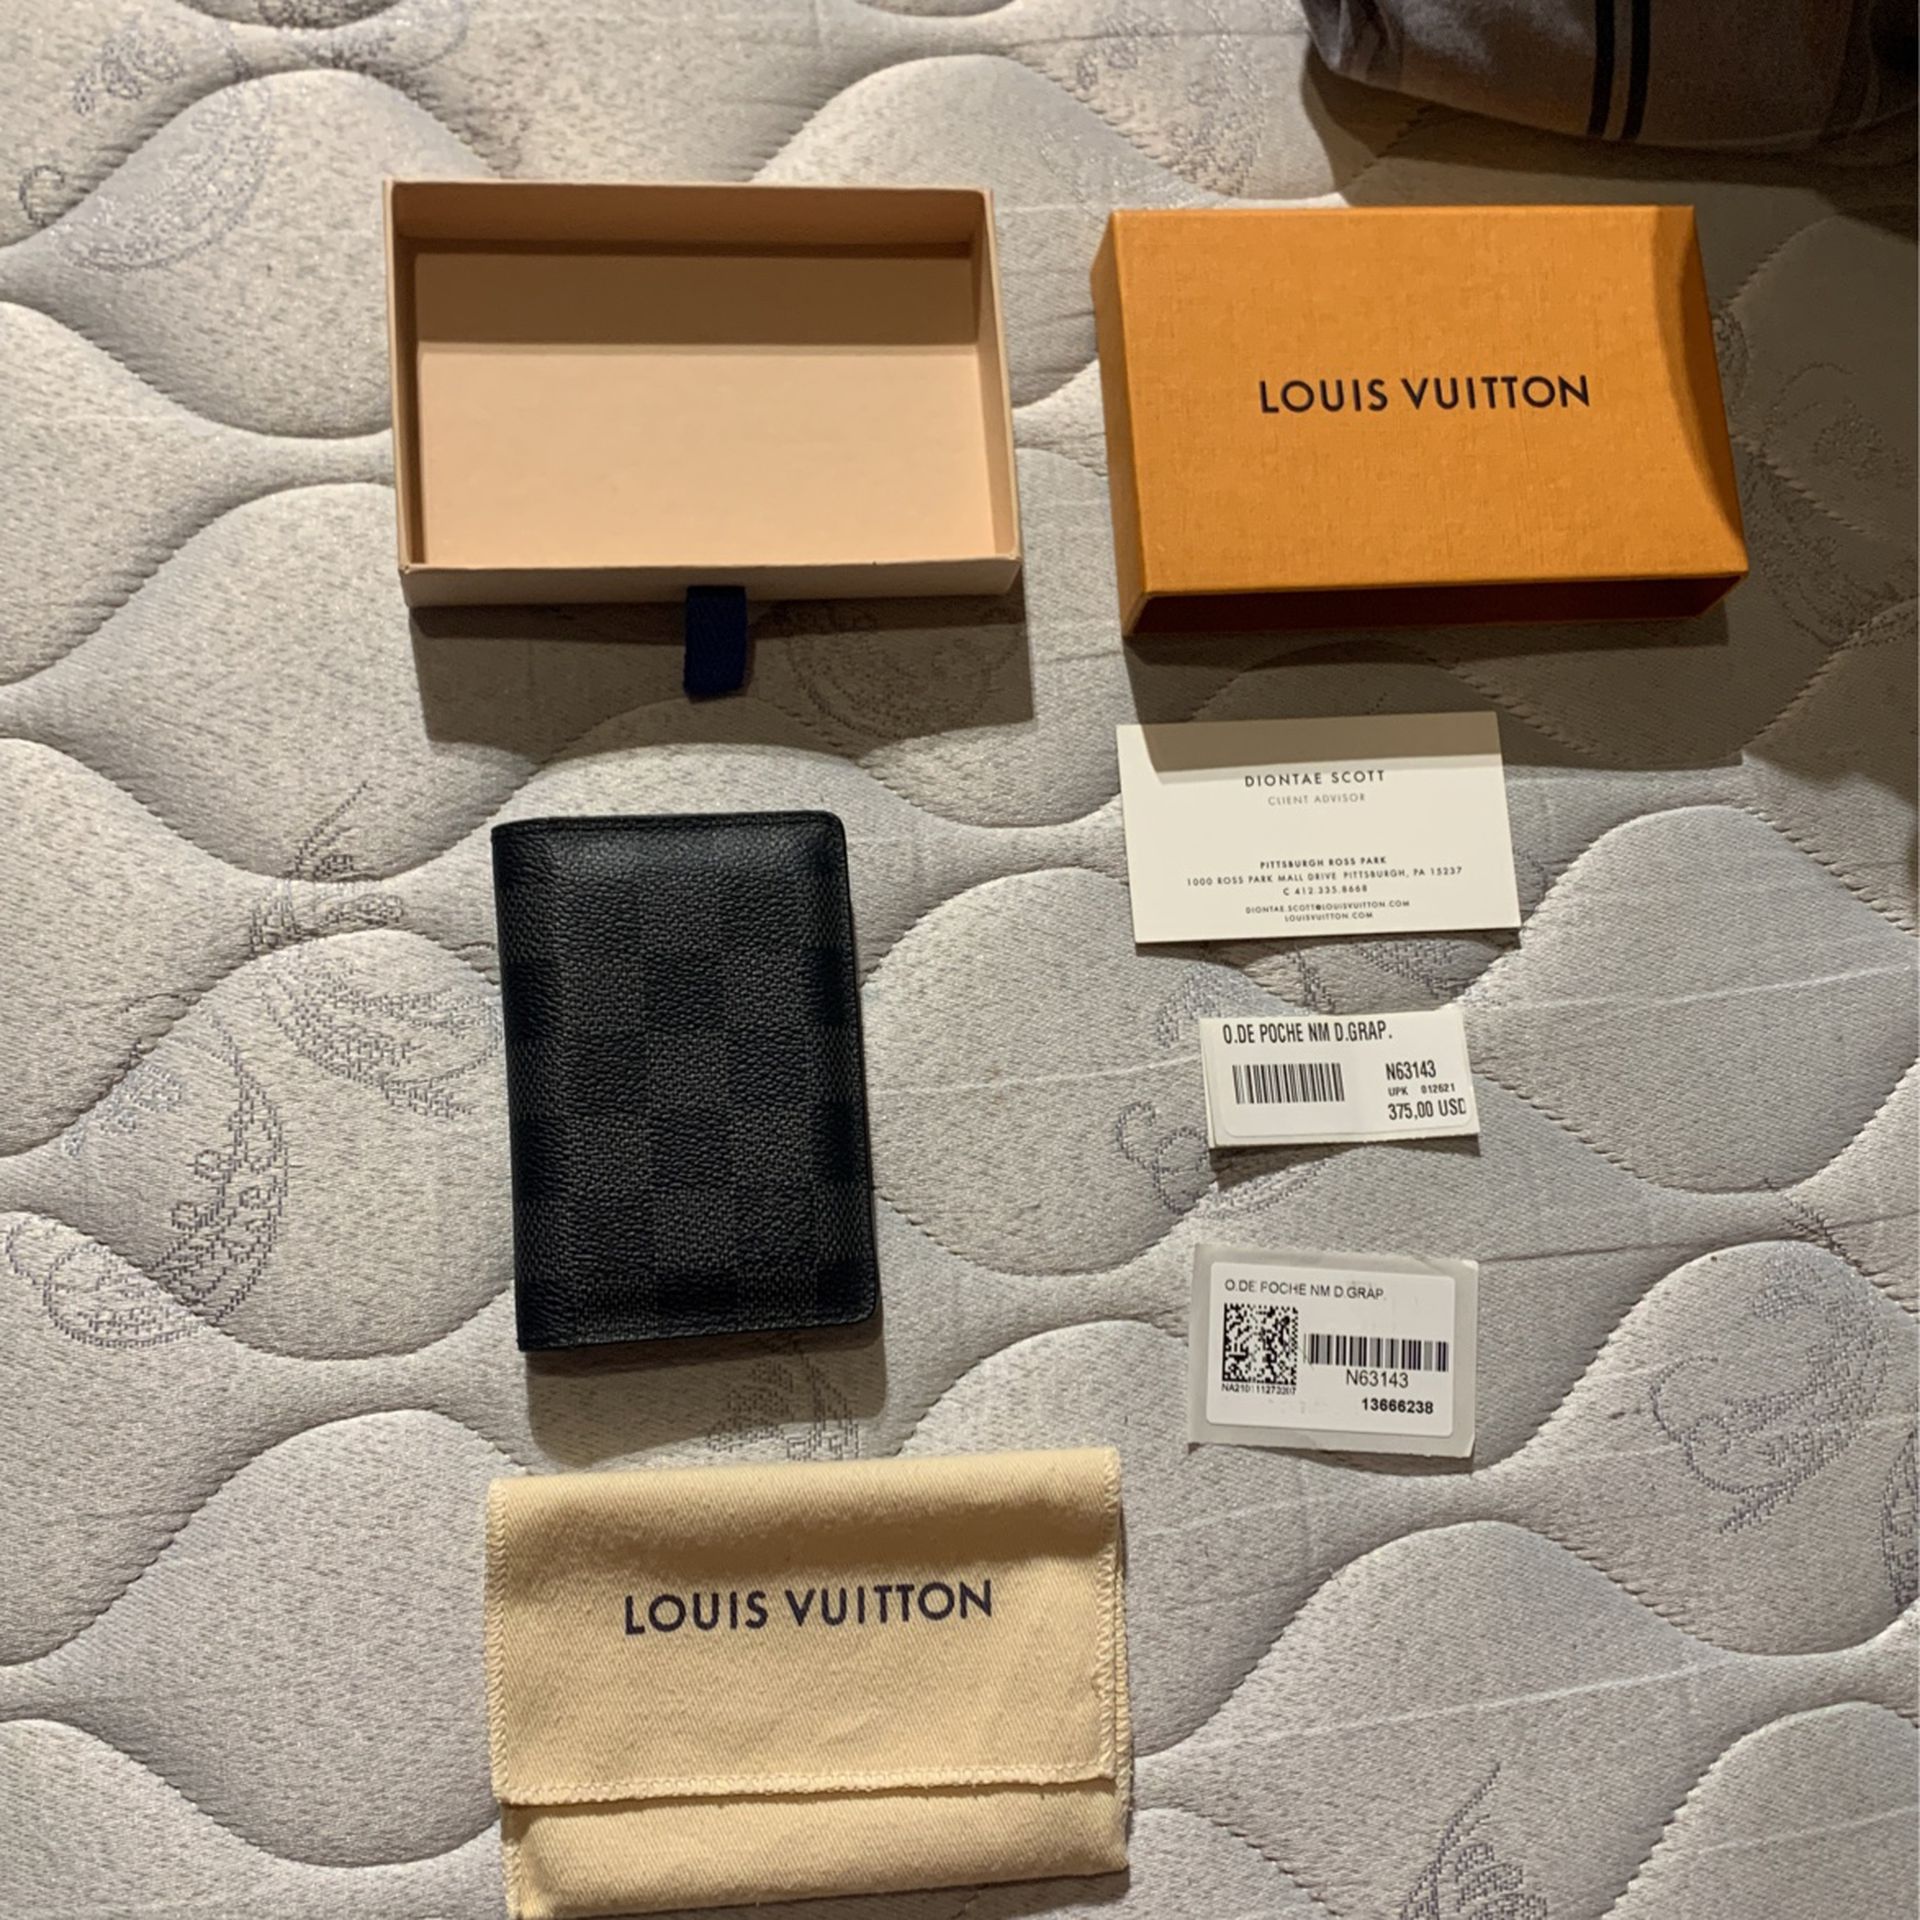 Brand New Louis Vuitton Wallet Will Negotiate Price for Sale in